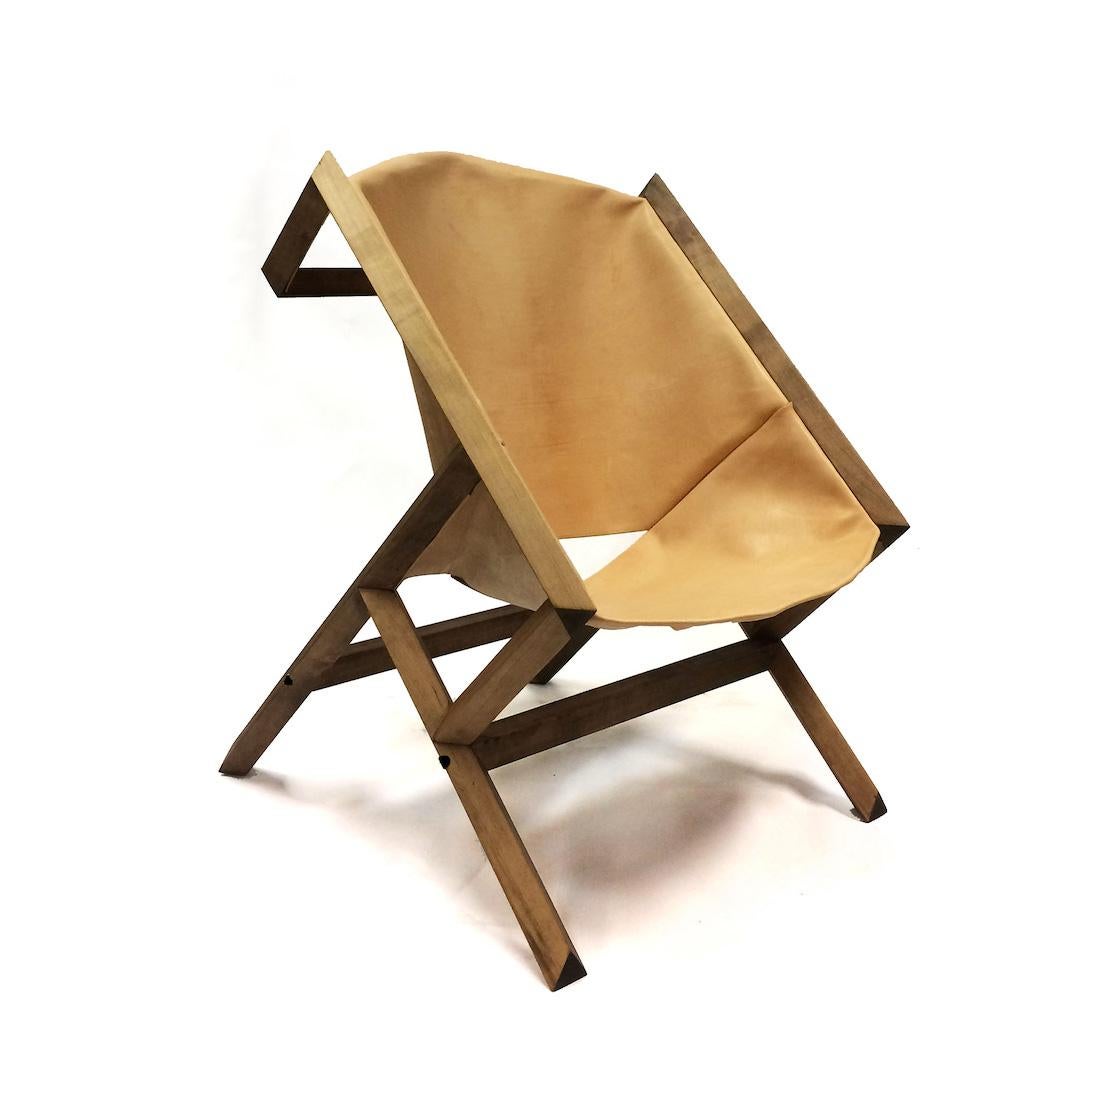 The KANGURO lounge chair was launched at the Wanted Design fair in 2016, at the Argentinian pavillion during the New York design week.
His design language and construction process is base in the slow made philosophy, combining  traditional and